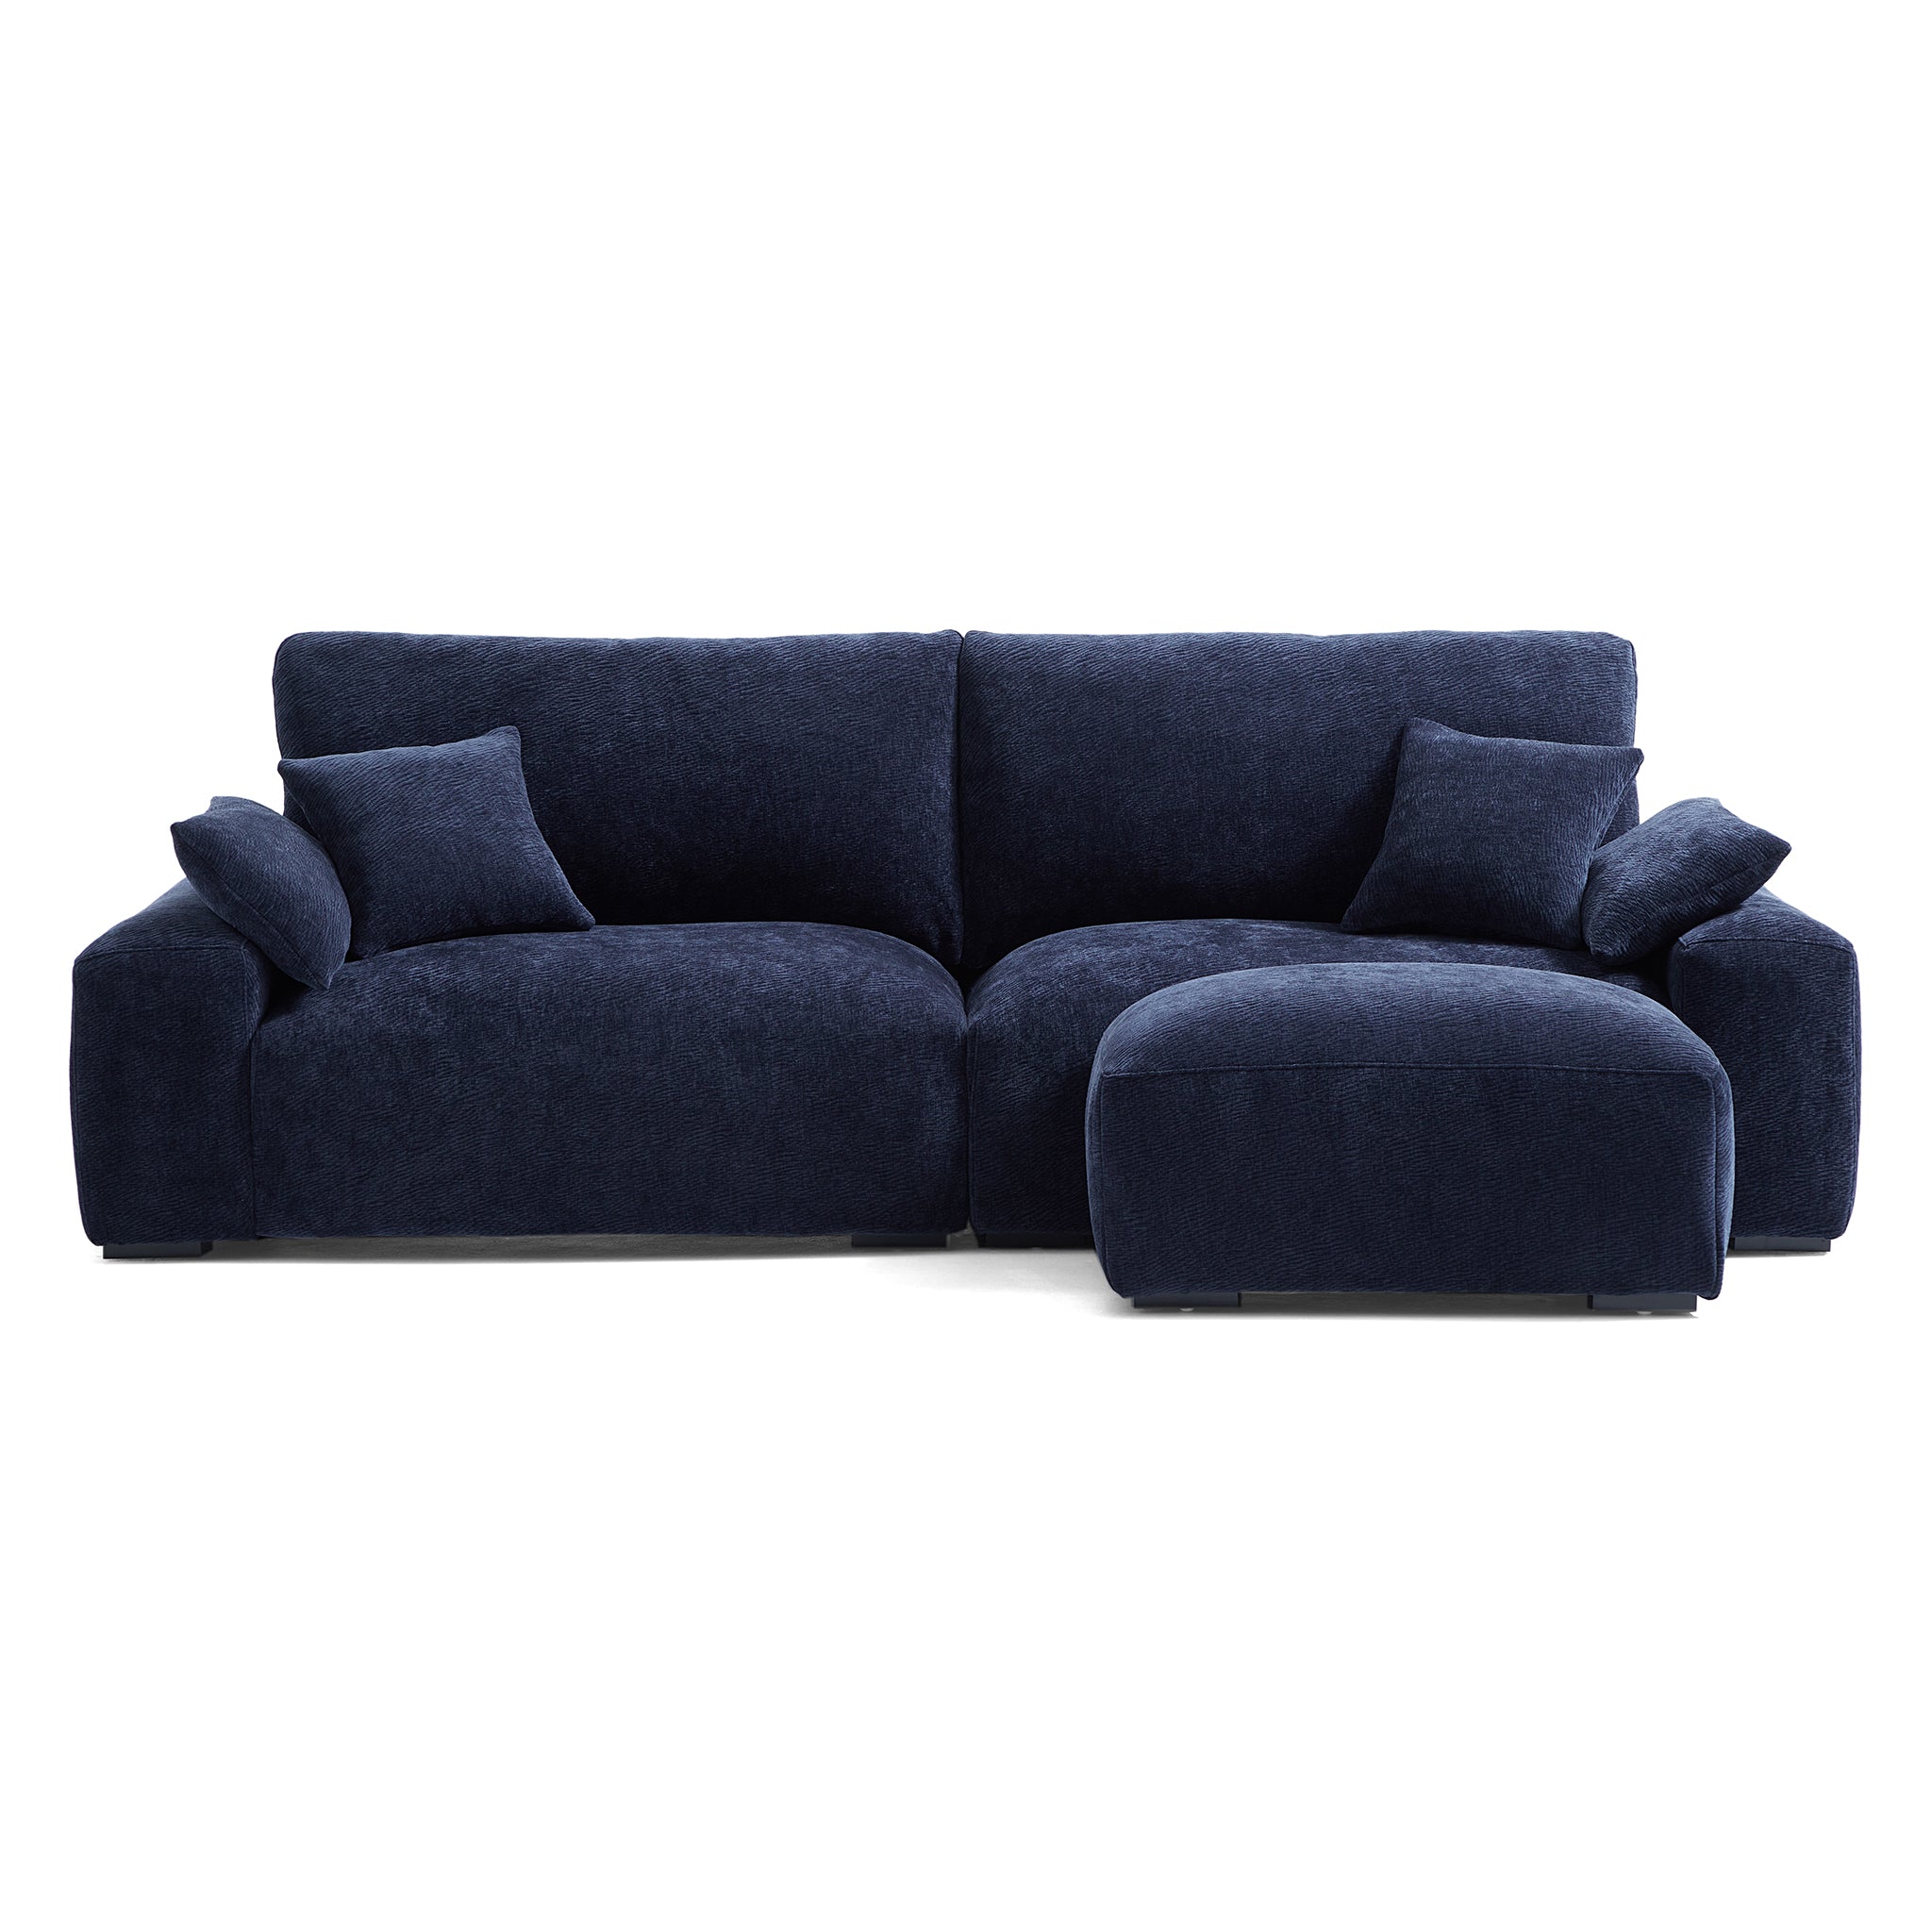 The Empress Navy Blue Sofa and Ottoman